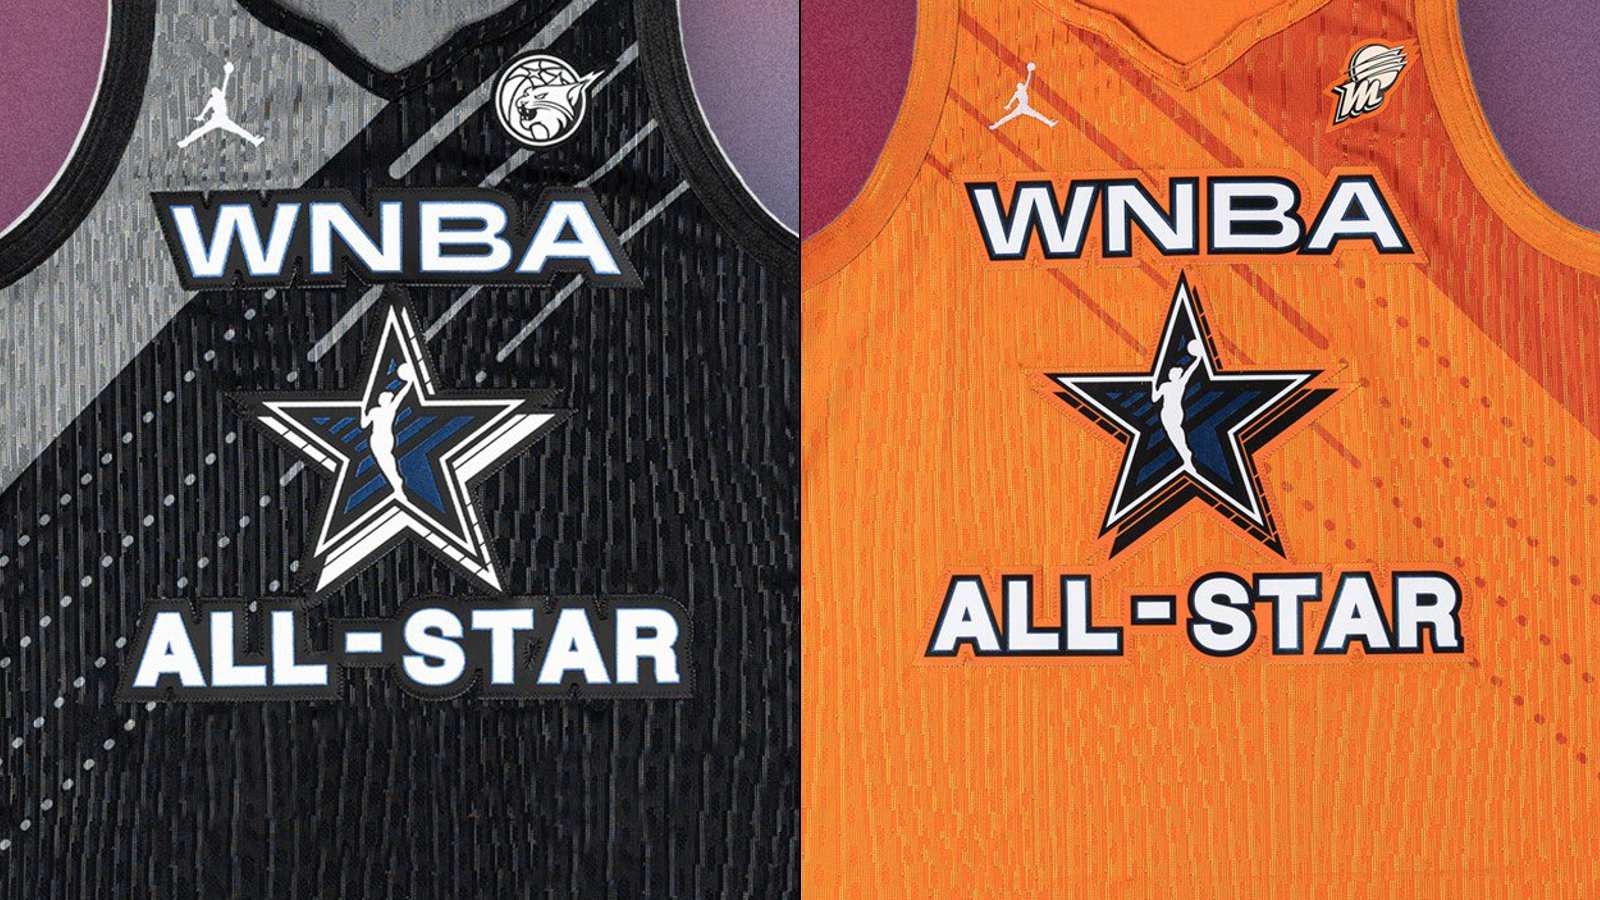 This year's @wnba All-Star Game jerseys are 🔥🔥 And they got the  @jumpman23 logo on it too! . . . . . #wnba #allstargame #newjersey